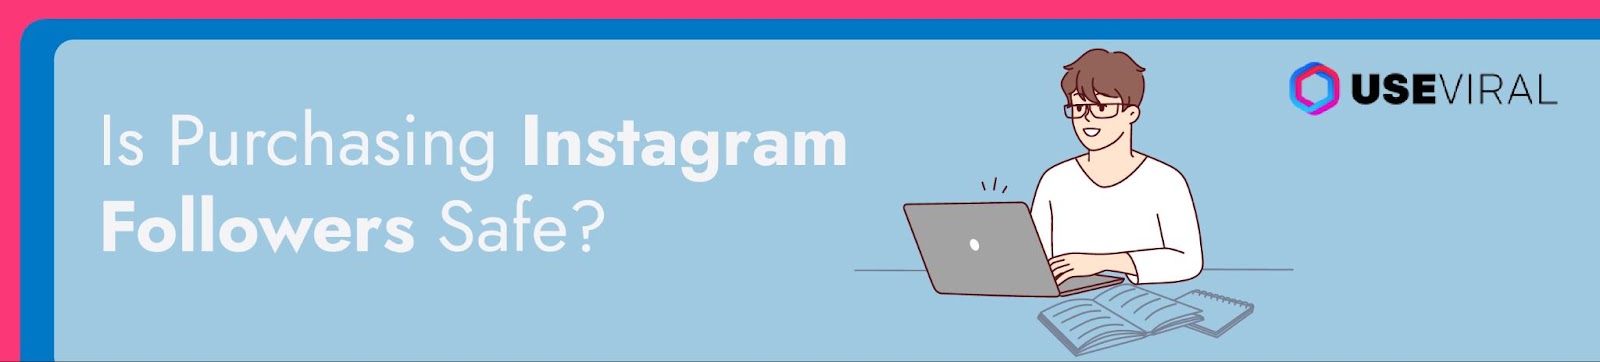 Is Purchasing Instagram Followers Safe?